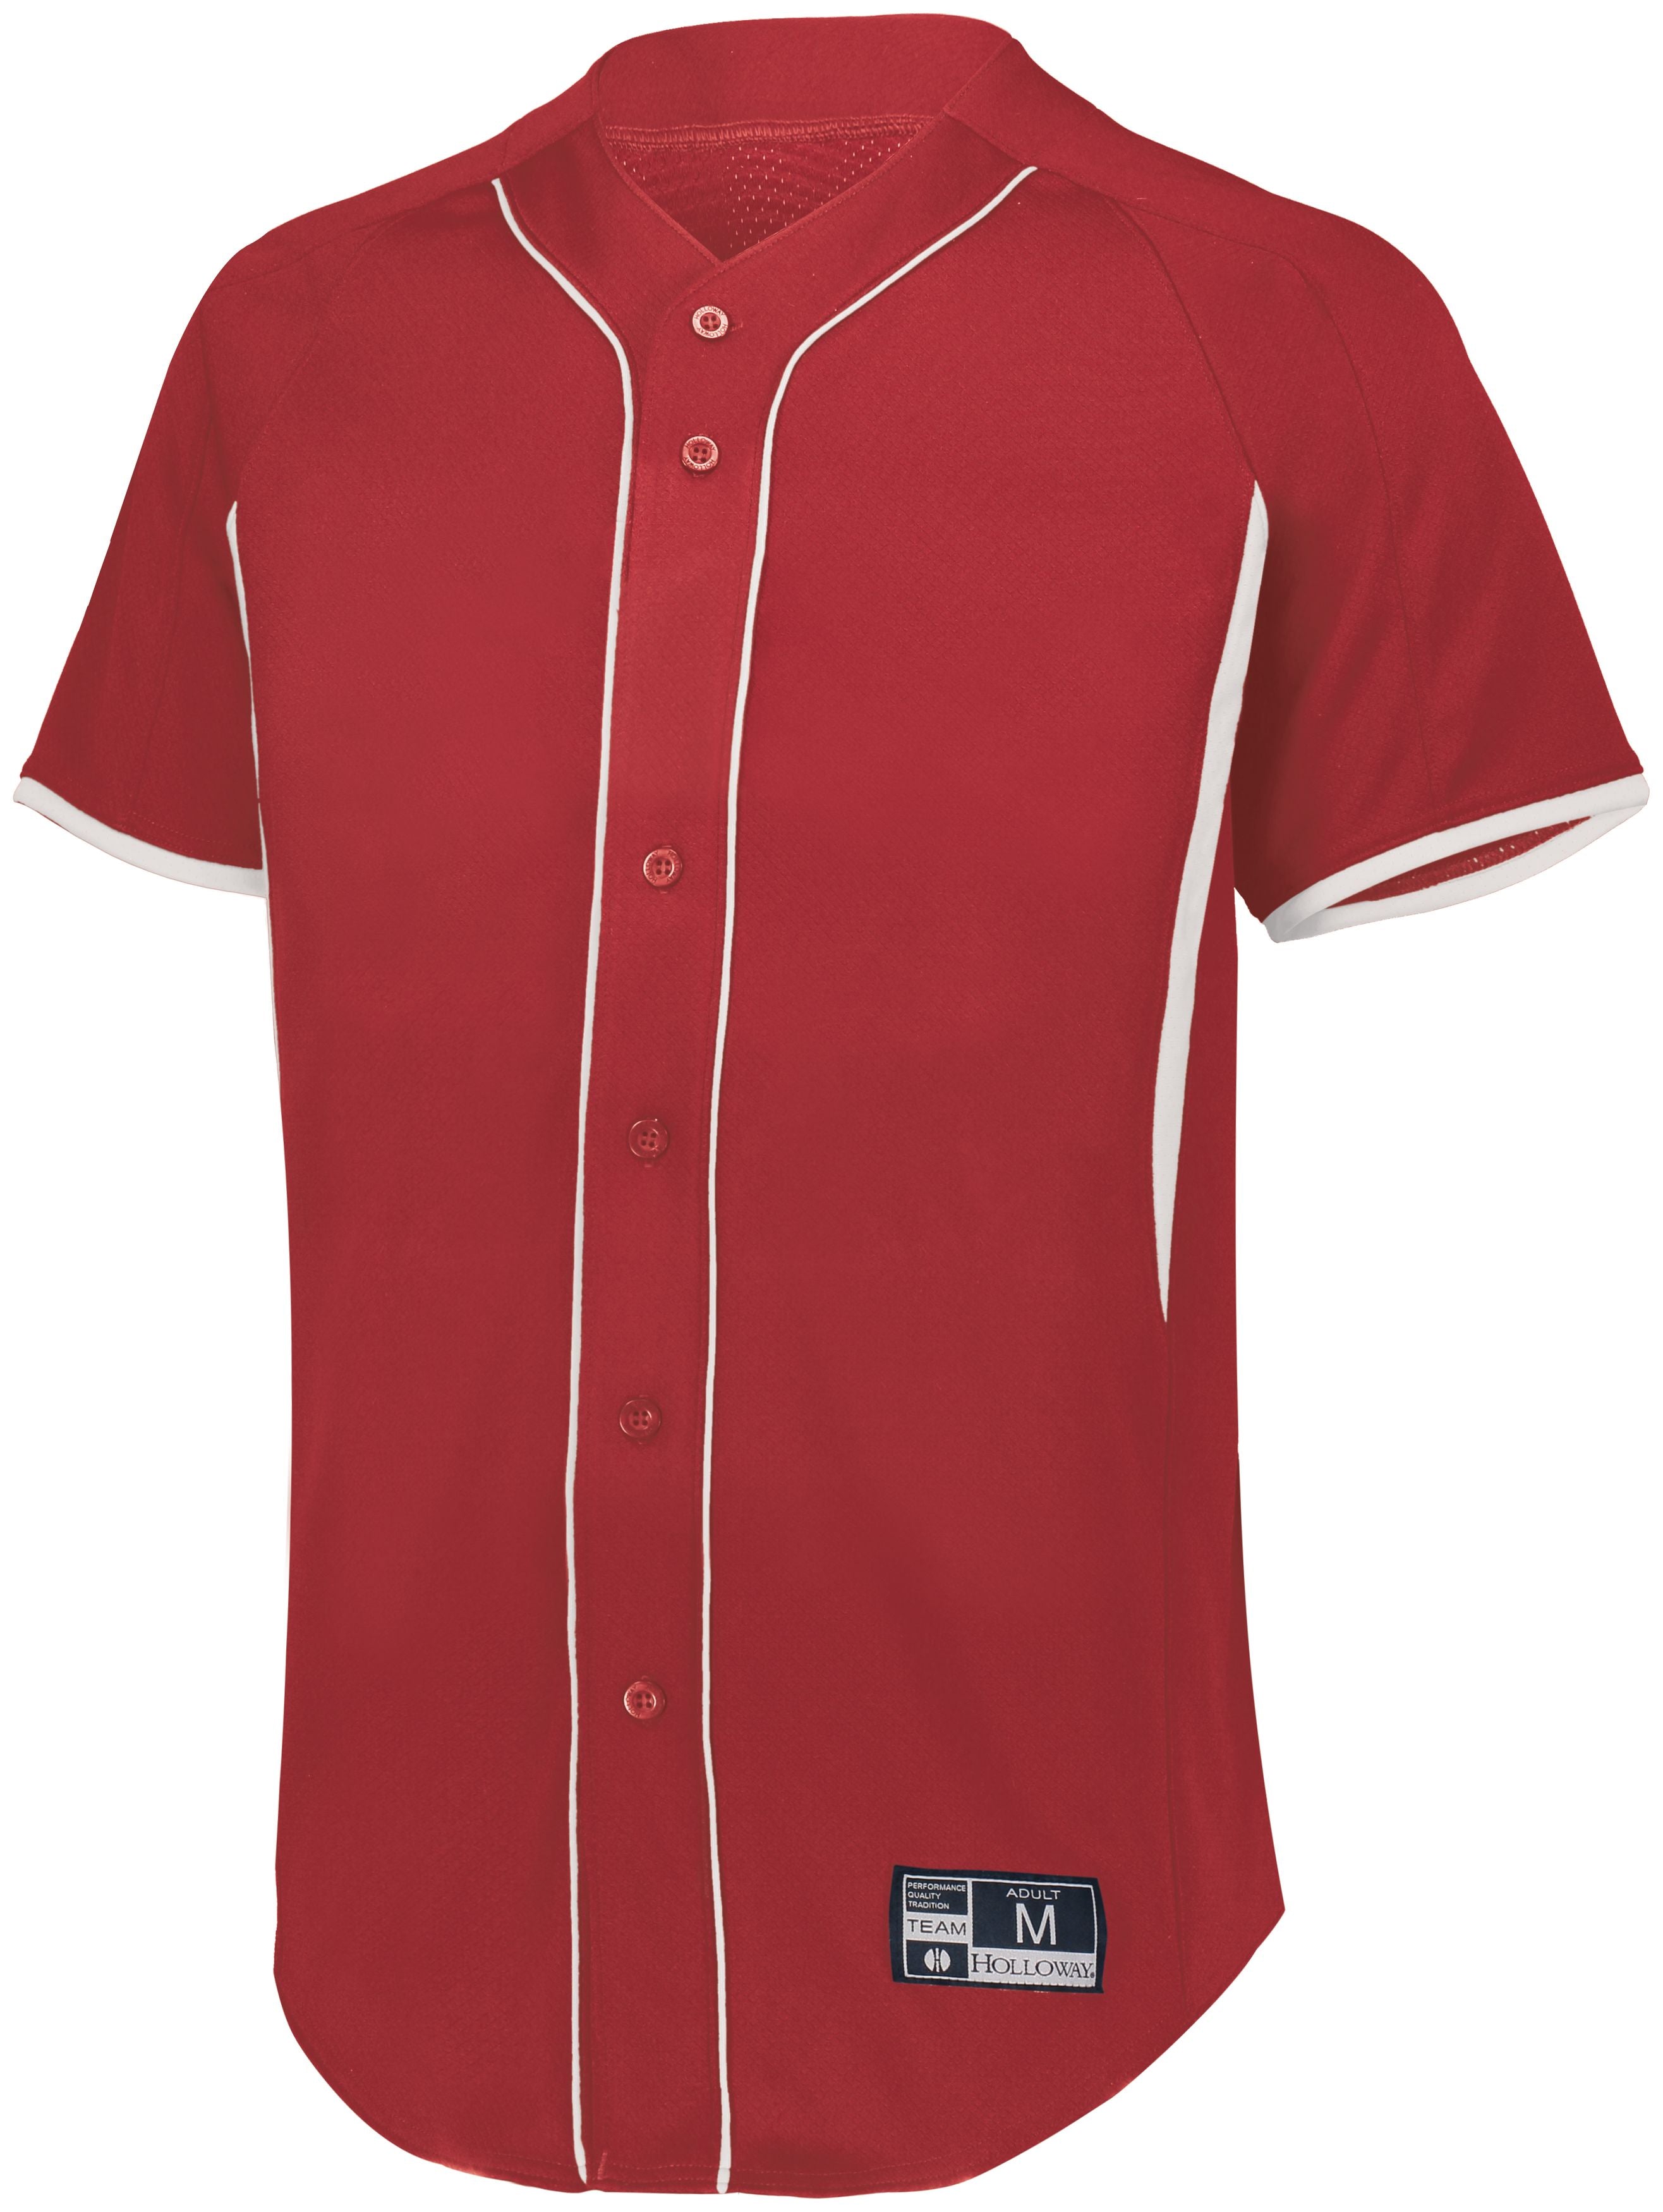 Holloway Game7 Full-Button Baseball Jersey in Scarlet/White  -Part of the Adult, Adult-Jersey, Baseball, Holloway, Shirts, All-Sports, All-Sports-1 product lines at KanaleyCreations.com